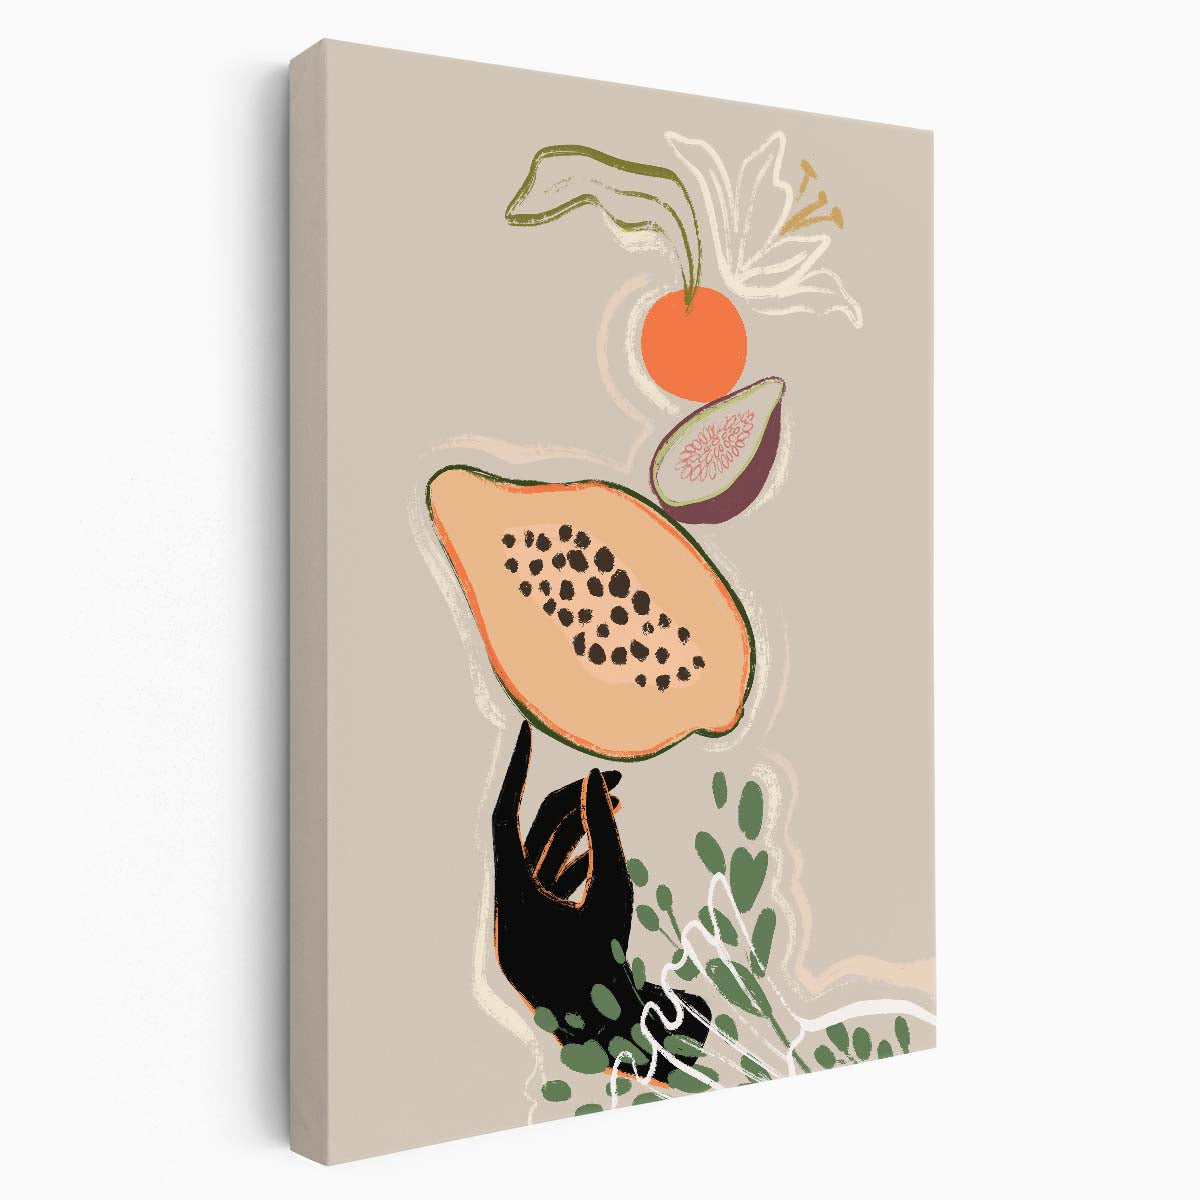 Colorful Boho Illustration of Woman Balancing Fresh Fruits in Kitchen by Luxuriance Designs, made in USA